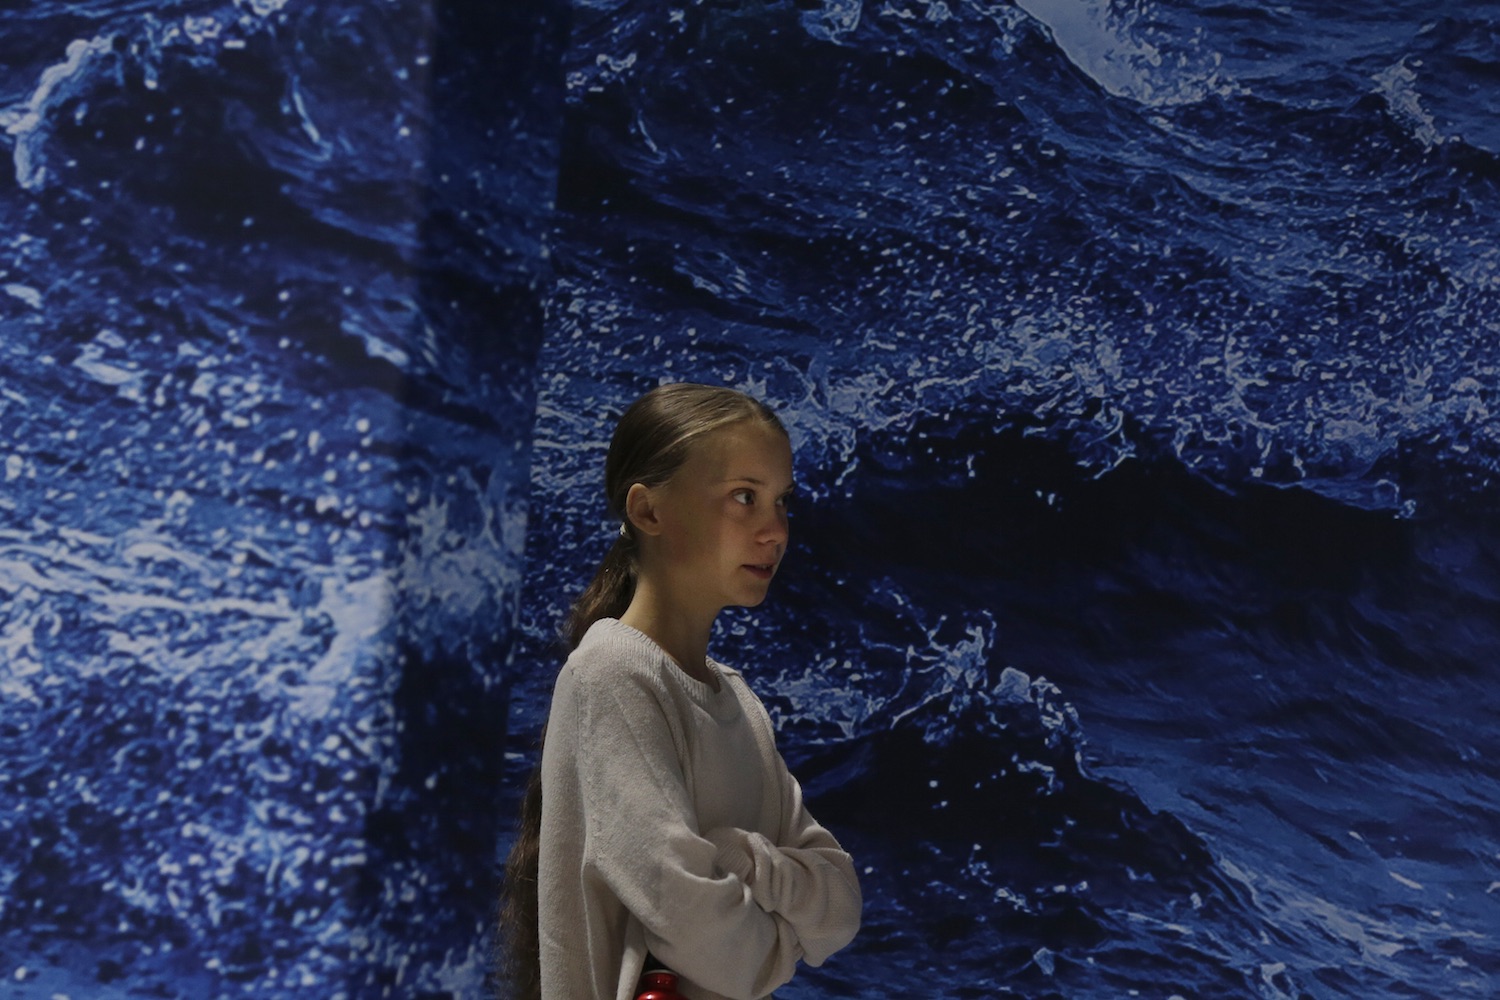 Greta Thunberg standing in front of a large poster of the ocean